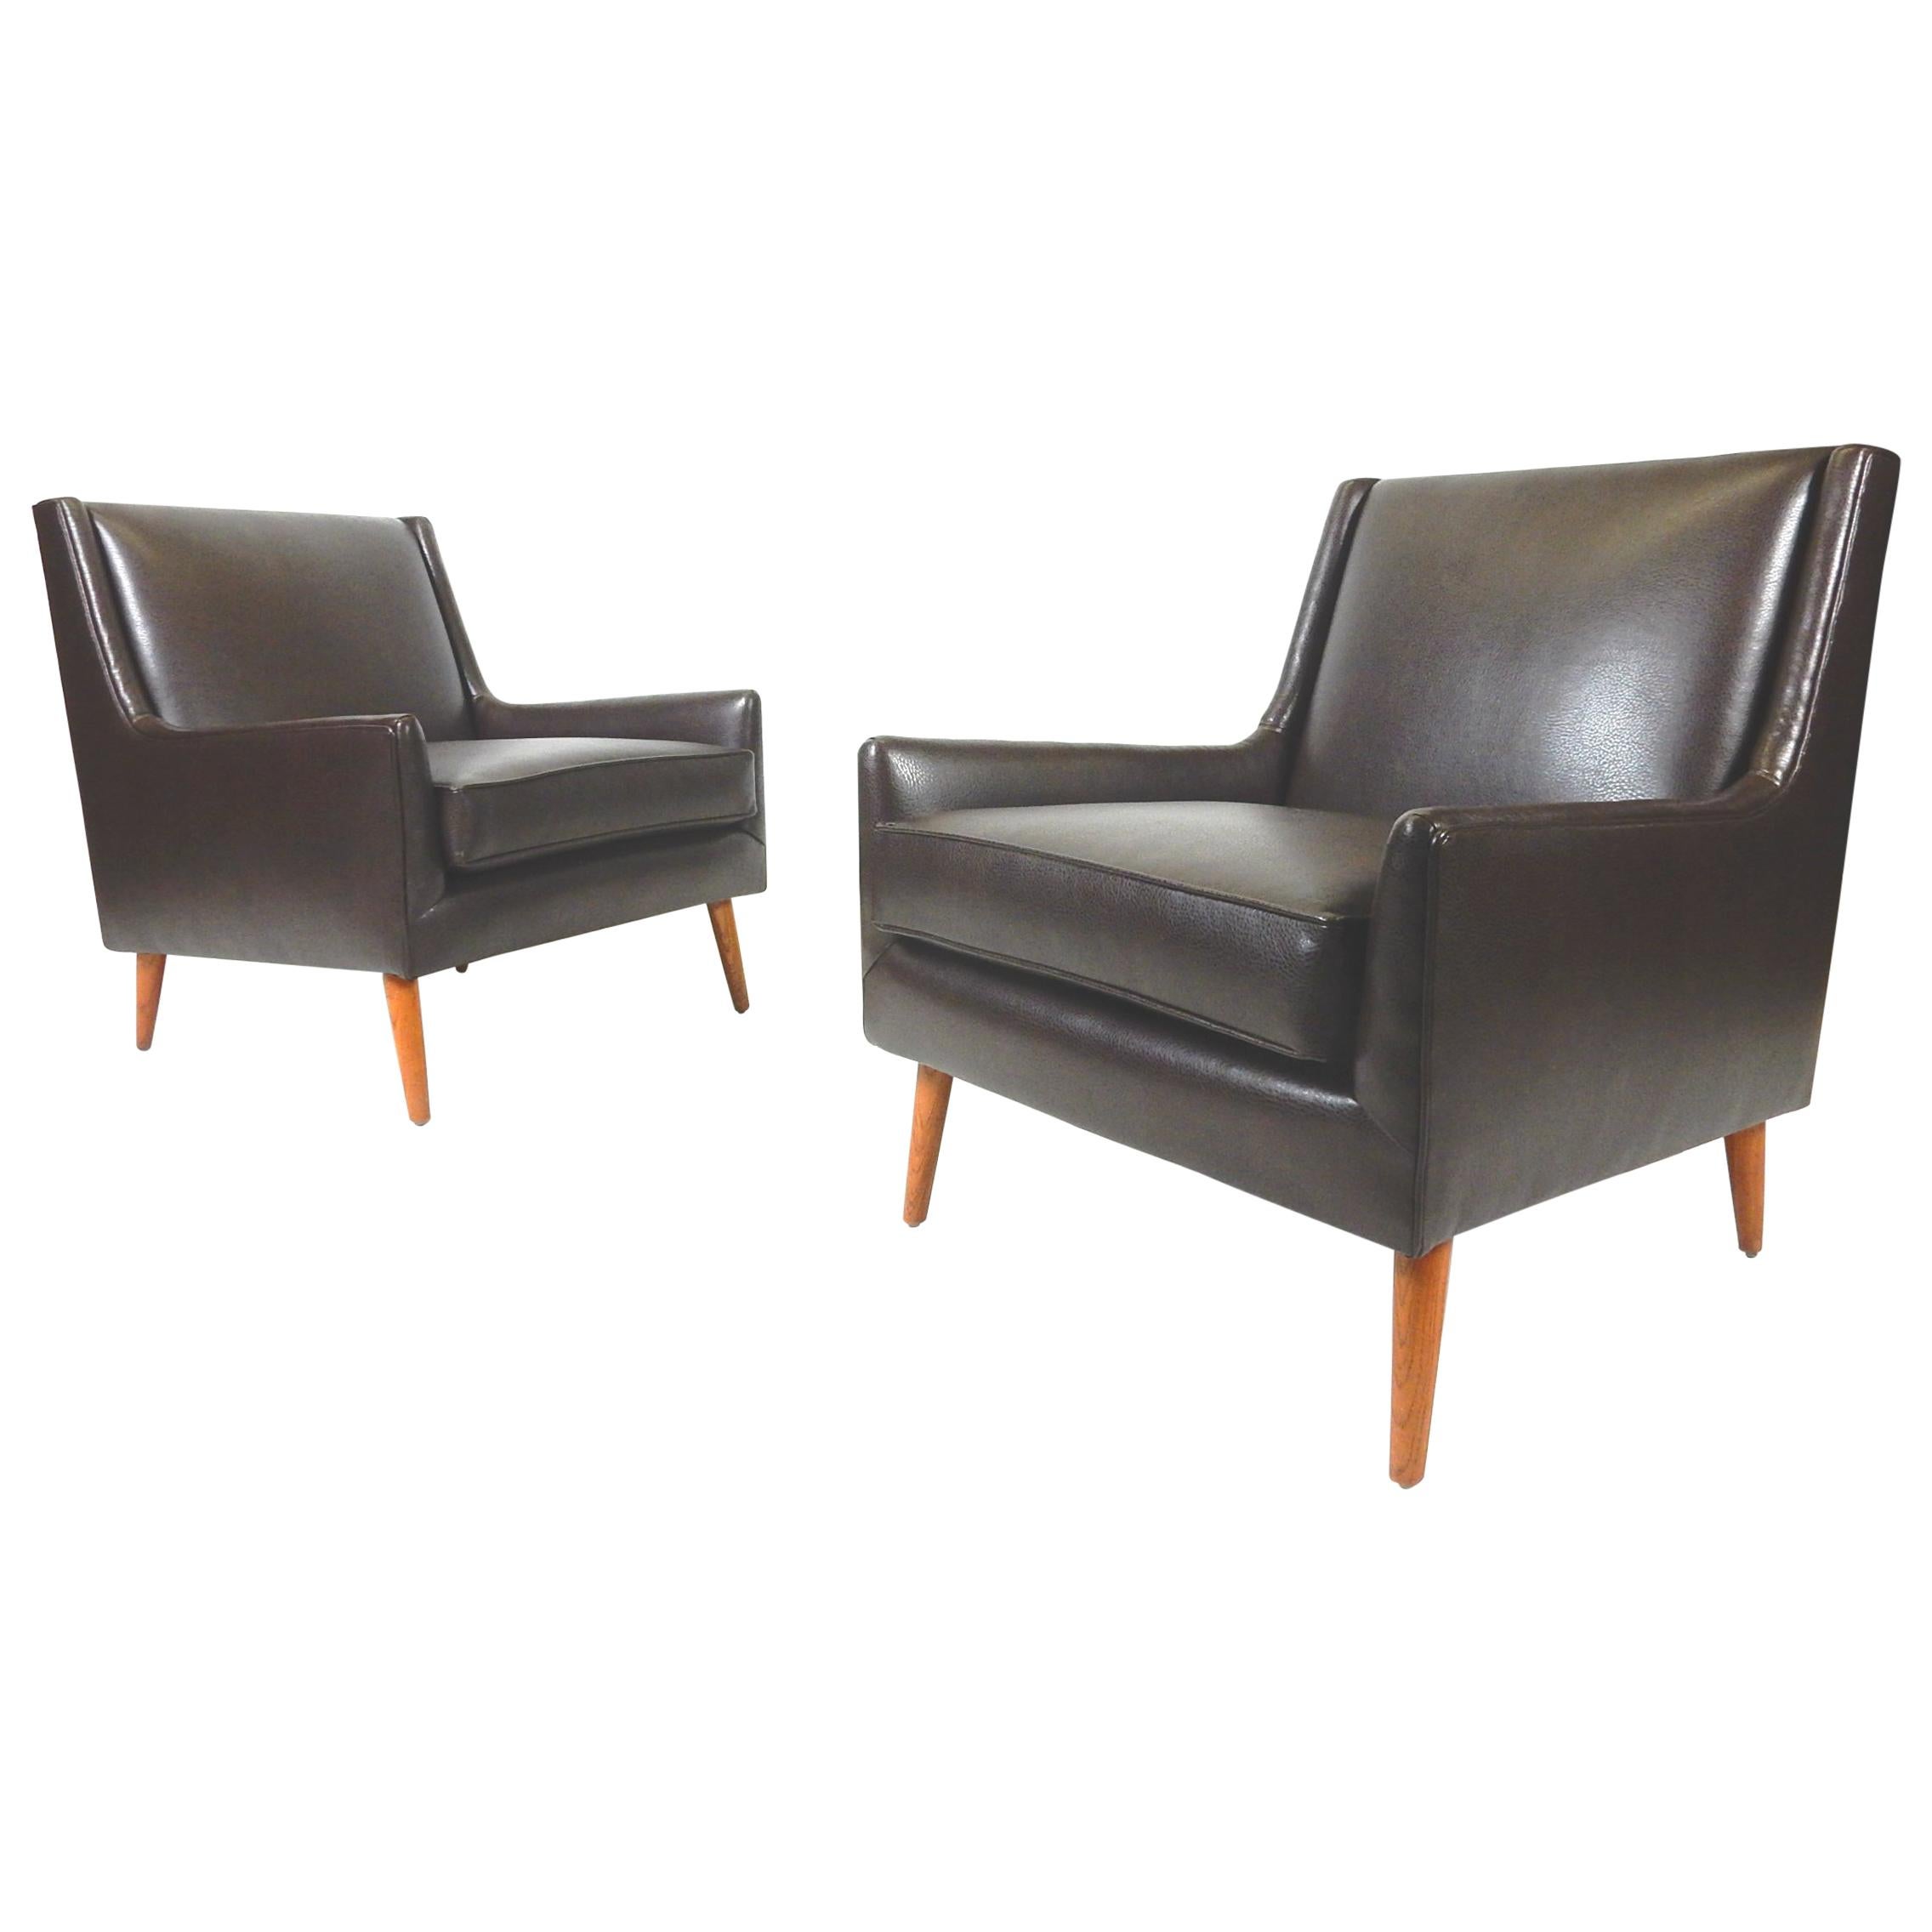 Incredible pair of 1950s Mid-Century Modern lounge chairs that are newly upholstered in
Fine butter soft chocolate brown faux leather.
They are in the style of Edward Wormley. Not marked or signed.
Extraordinary quality chairs that are very plush